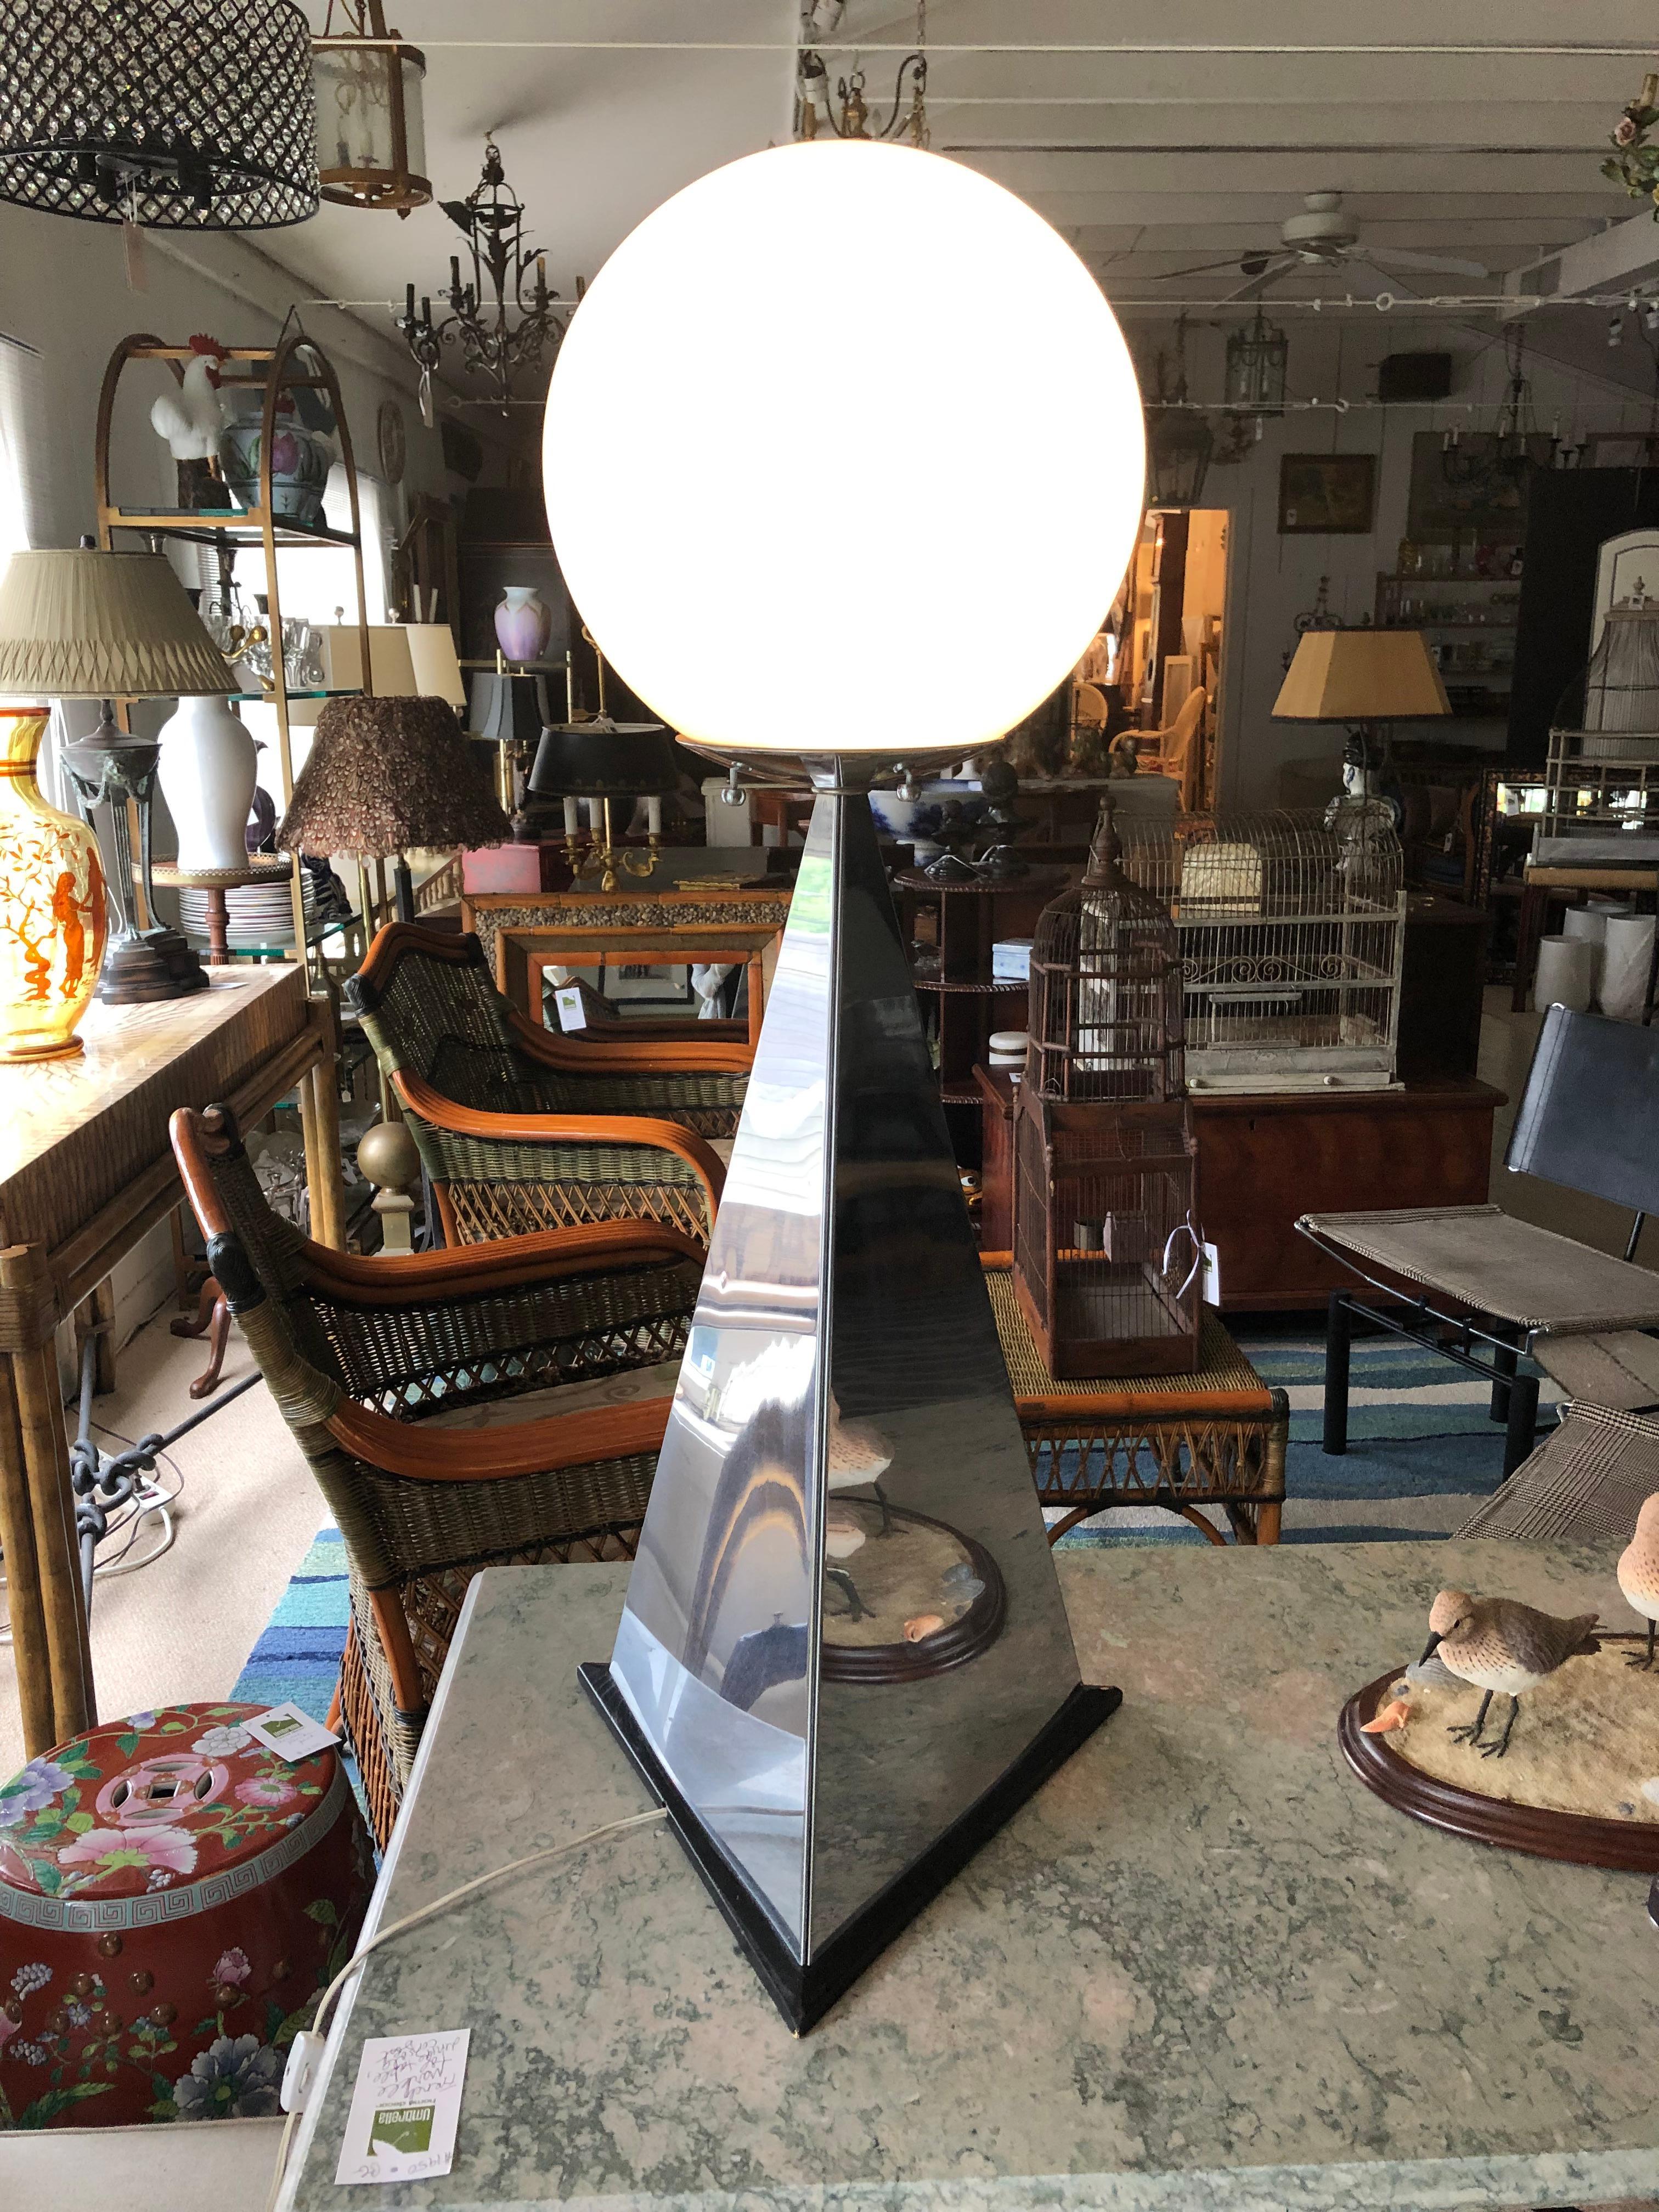 Monumental statement lamp having mirrored triangular obelisk signed C Jere on the bottom. The lamp is triangular in form with a large glass ball globe top, circa 1970s Art Deco Revival glam disco style. Accepts standard size screw in bulb. Base is